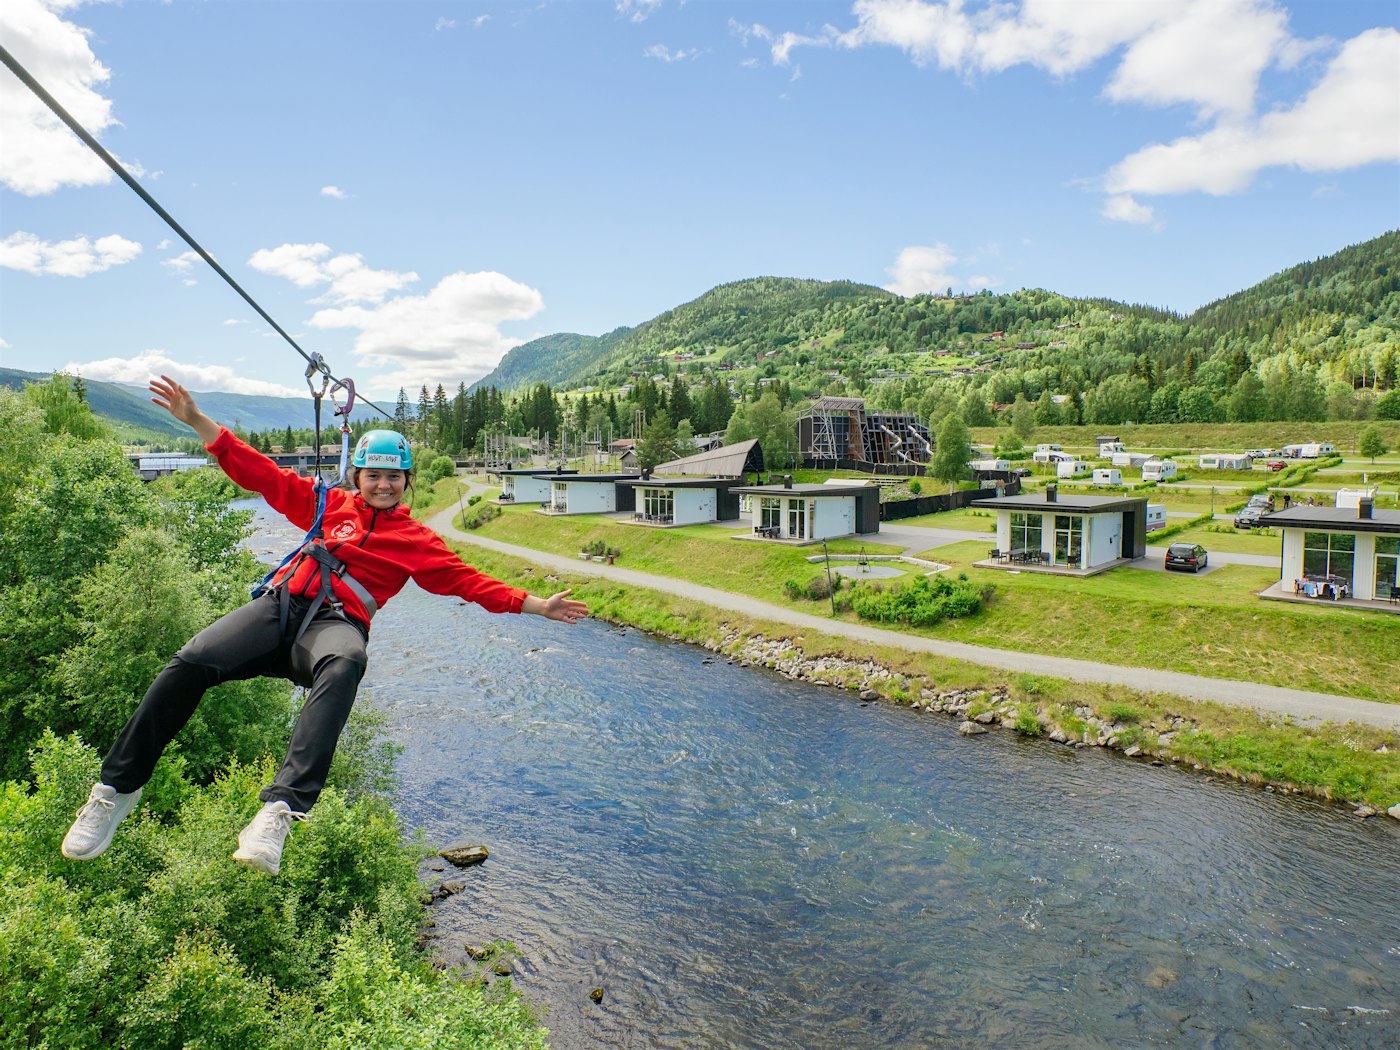 Lady in a zipline over the river, with the cabins and campsite in the background. Photo